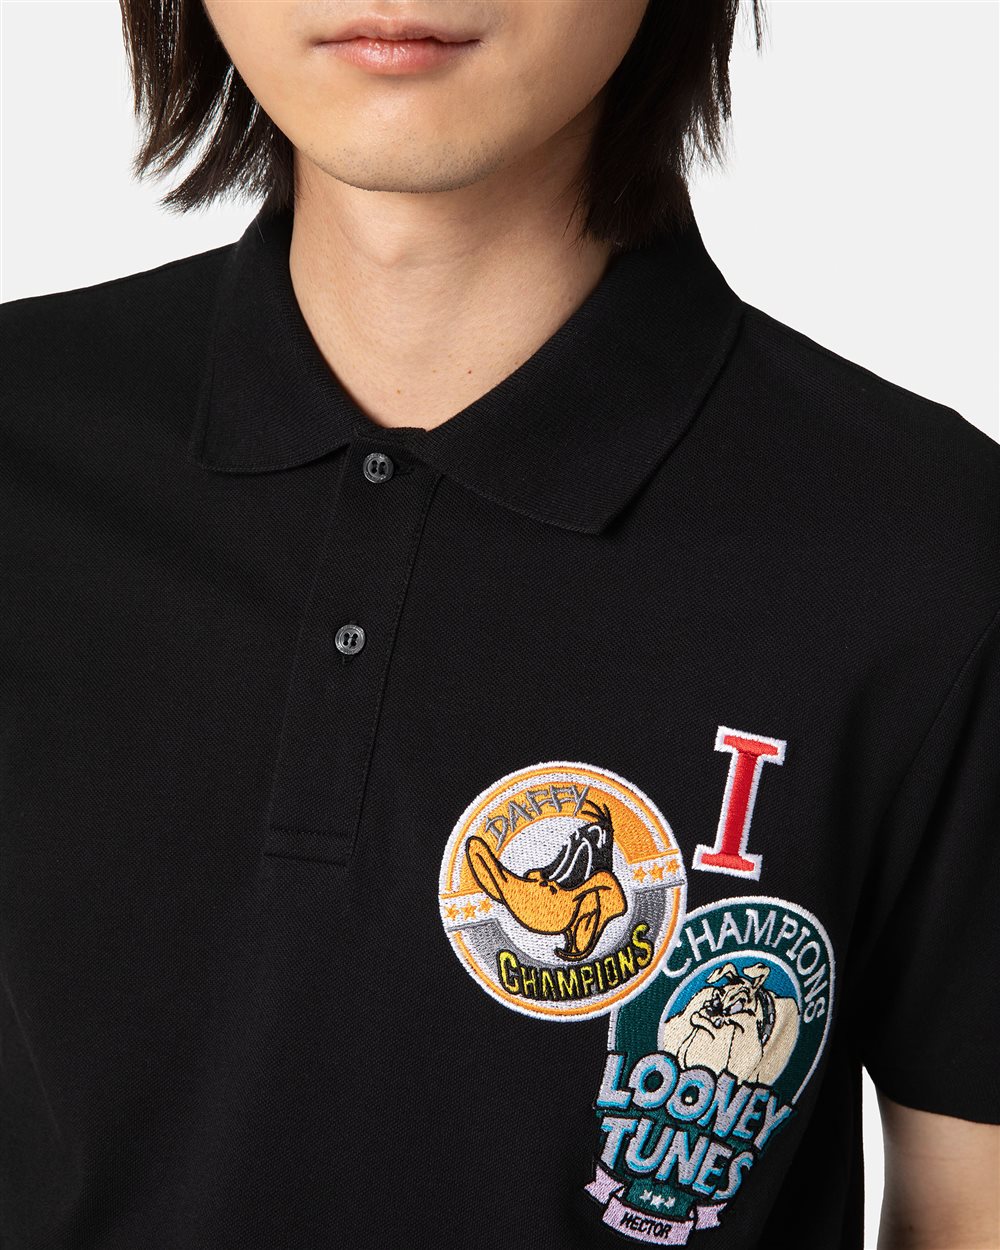 Black polo shirt with cartoon patch - Iceberg - Official Website